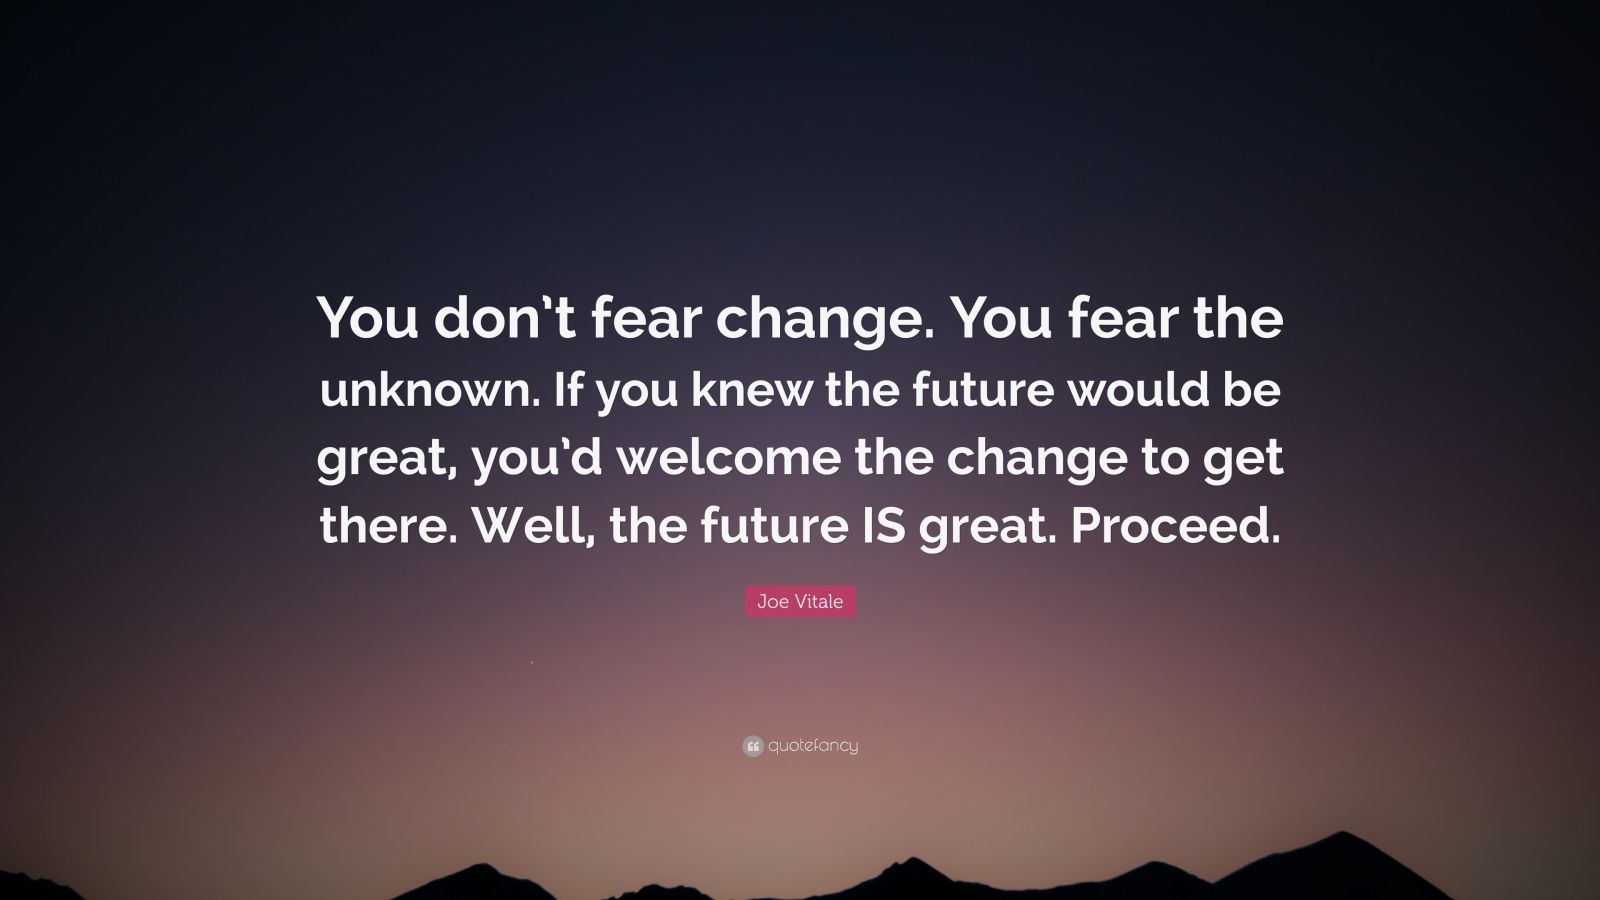 Joe Vitale Quote: “You don’t fear change. You fear the unknown. If you